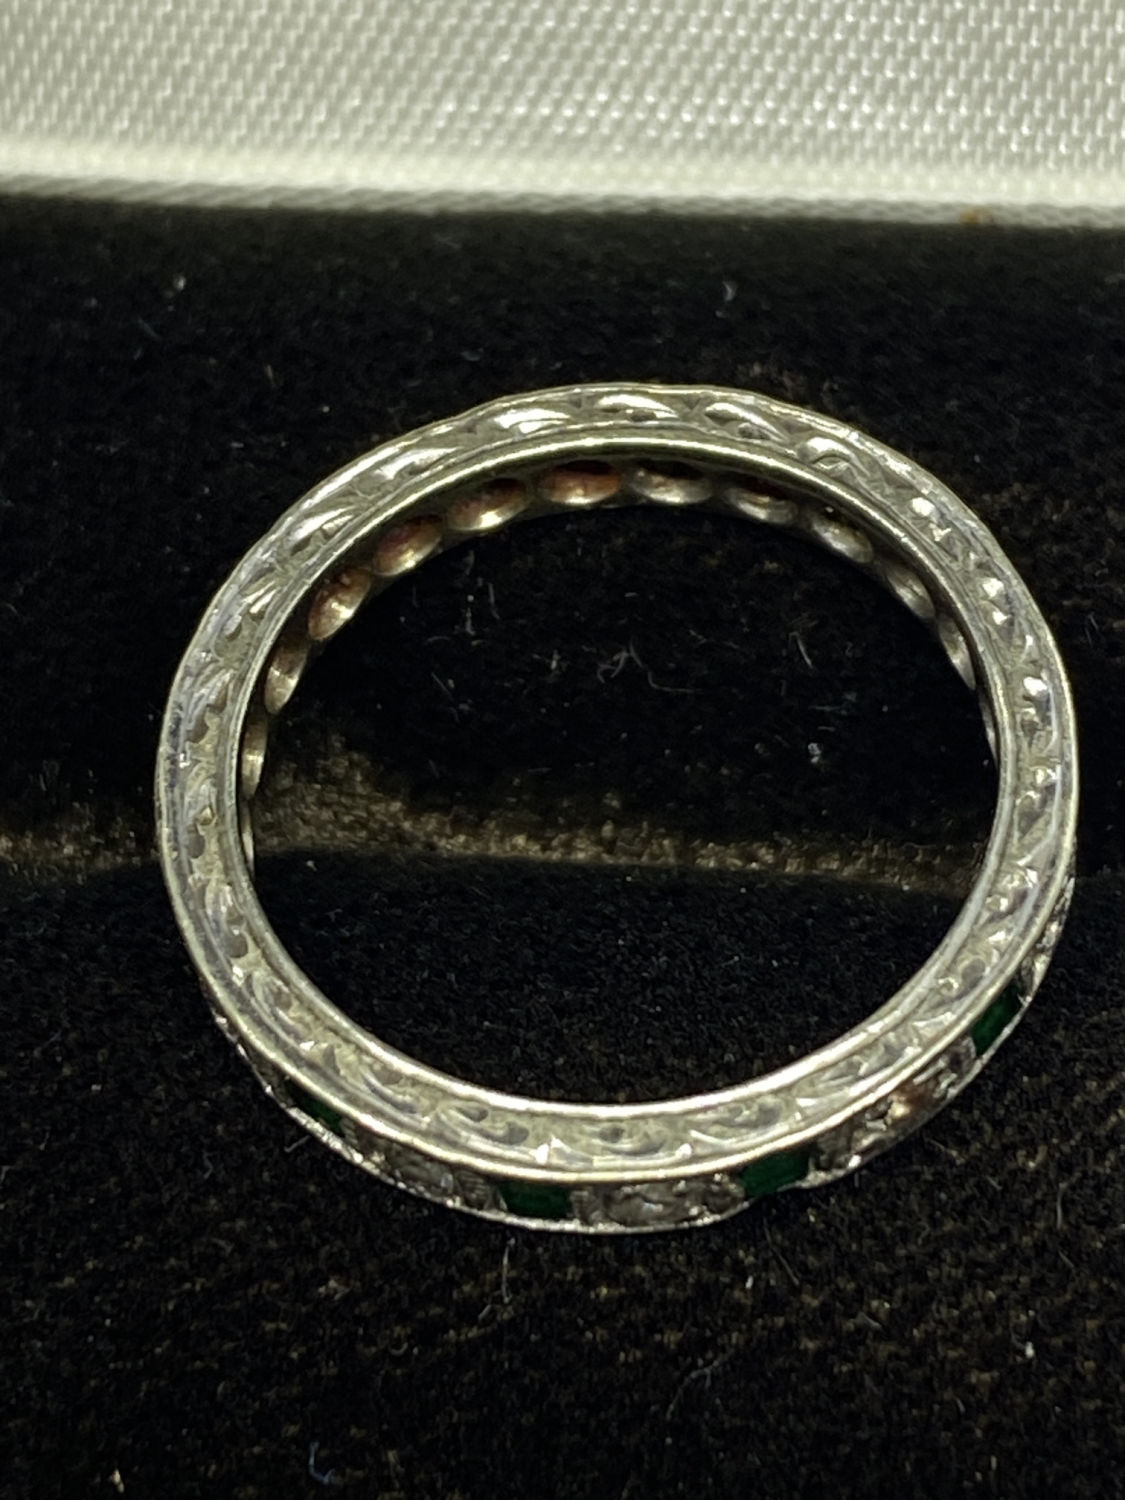 VINTAGE EMERALD FULL ETERNITY RING SET IN WHITE 9ct GOLD - CLEAR STONE MISSING & DINTED - Image 2 of 5